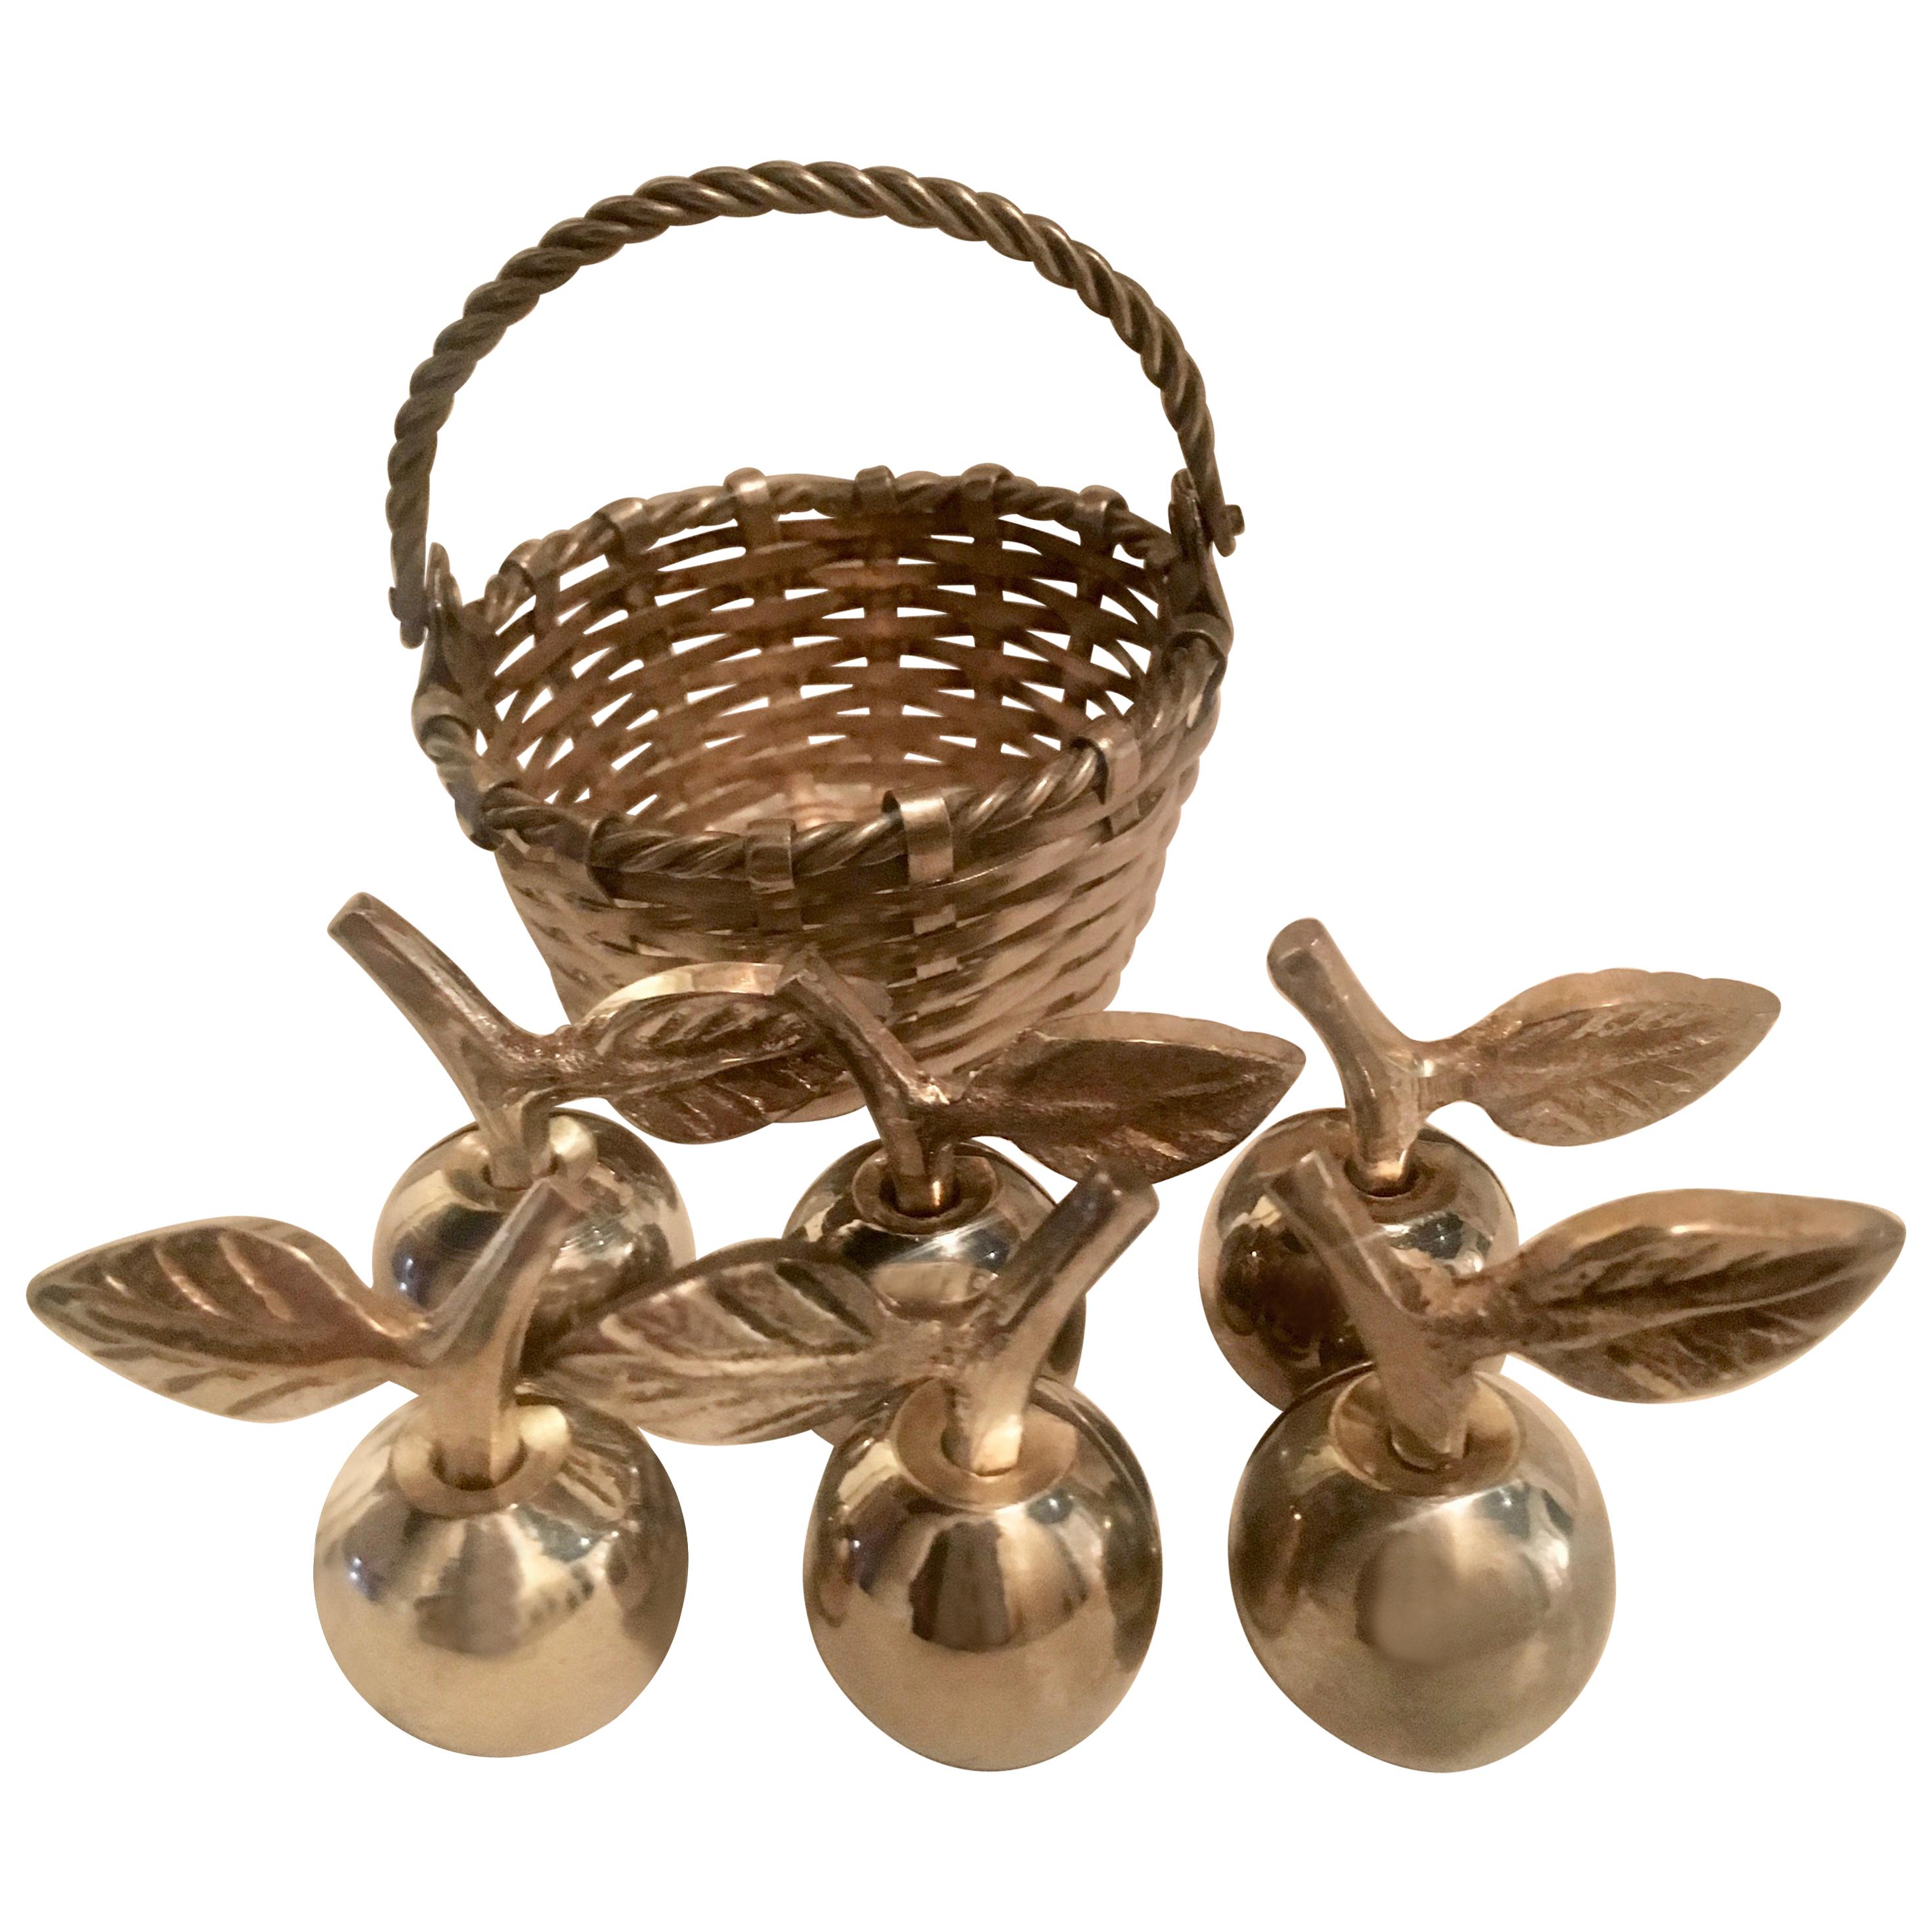 Six Silver Apple Place Card Menu Holders with Woven Basket